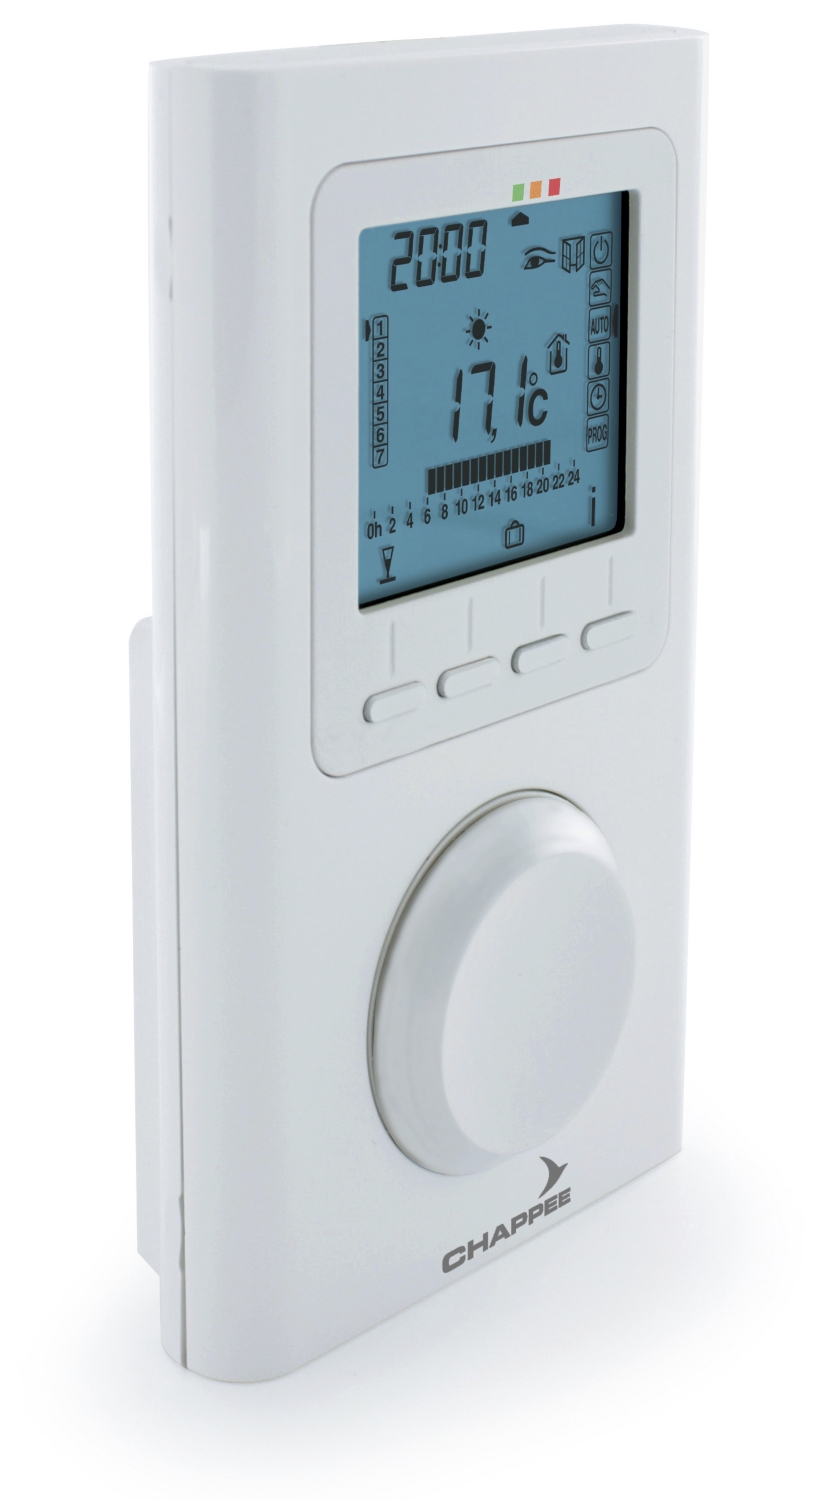  Thermostat d’ambiance programmable hebdomadaire 